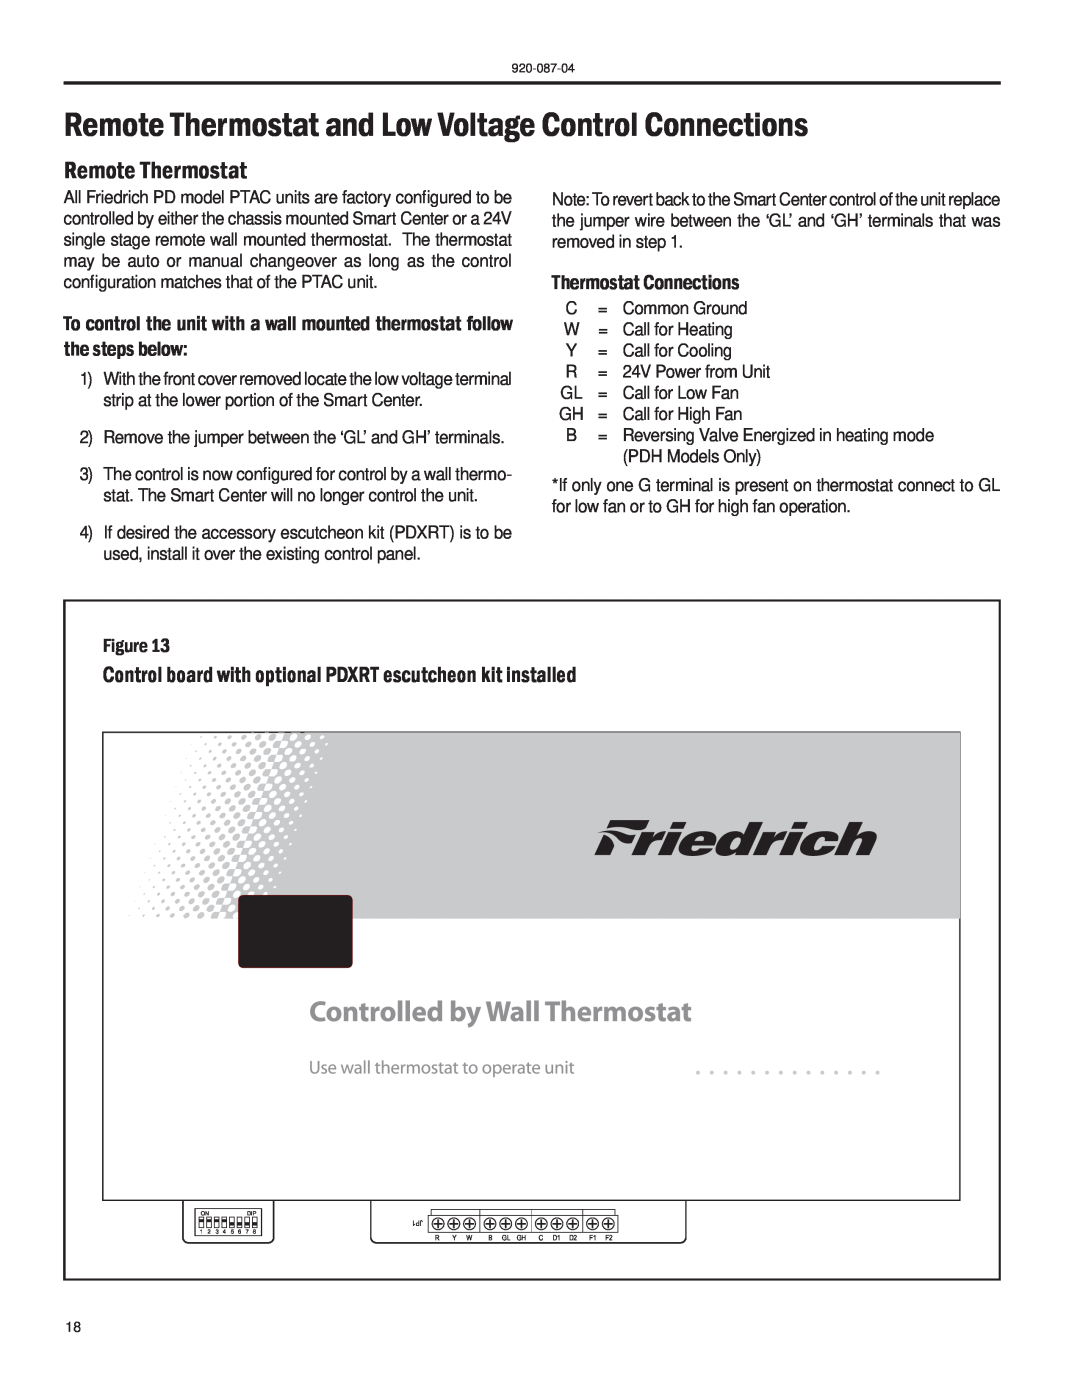 Friedrich HEAT PUMPS manual Remote Thermostat, Thermostat Connections 